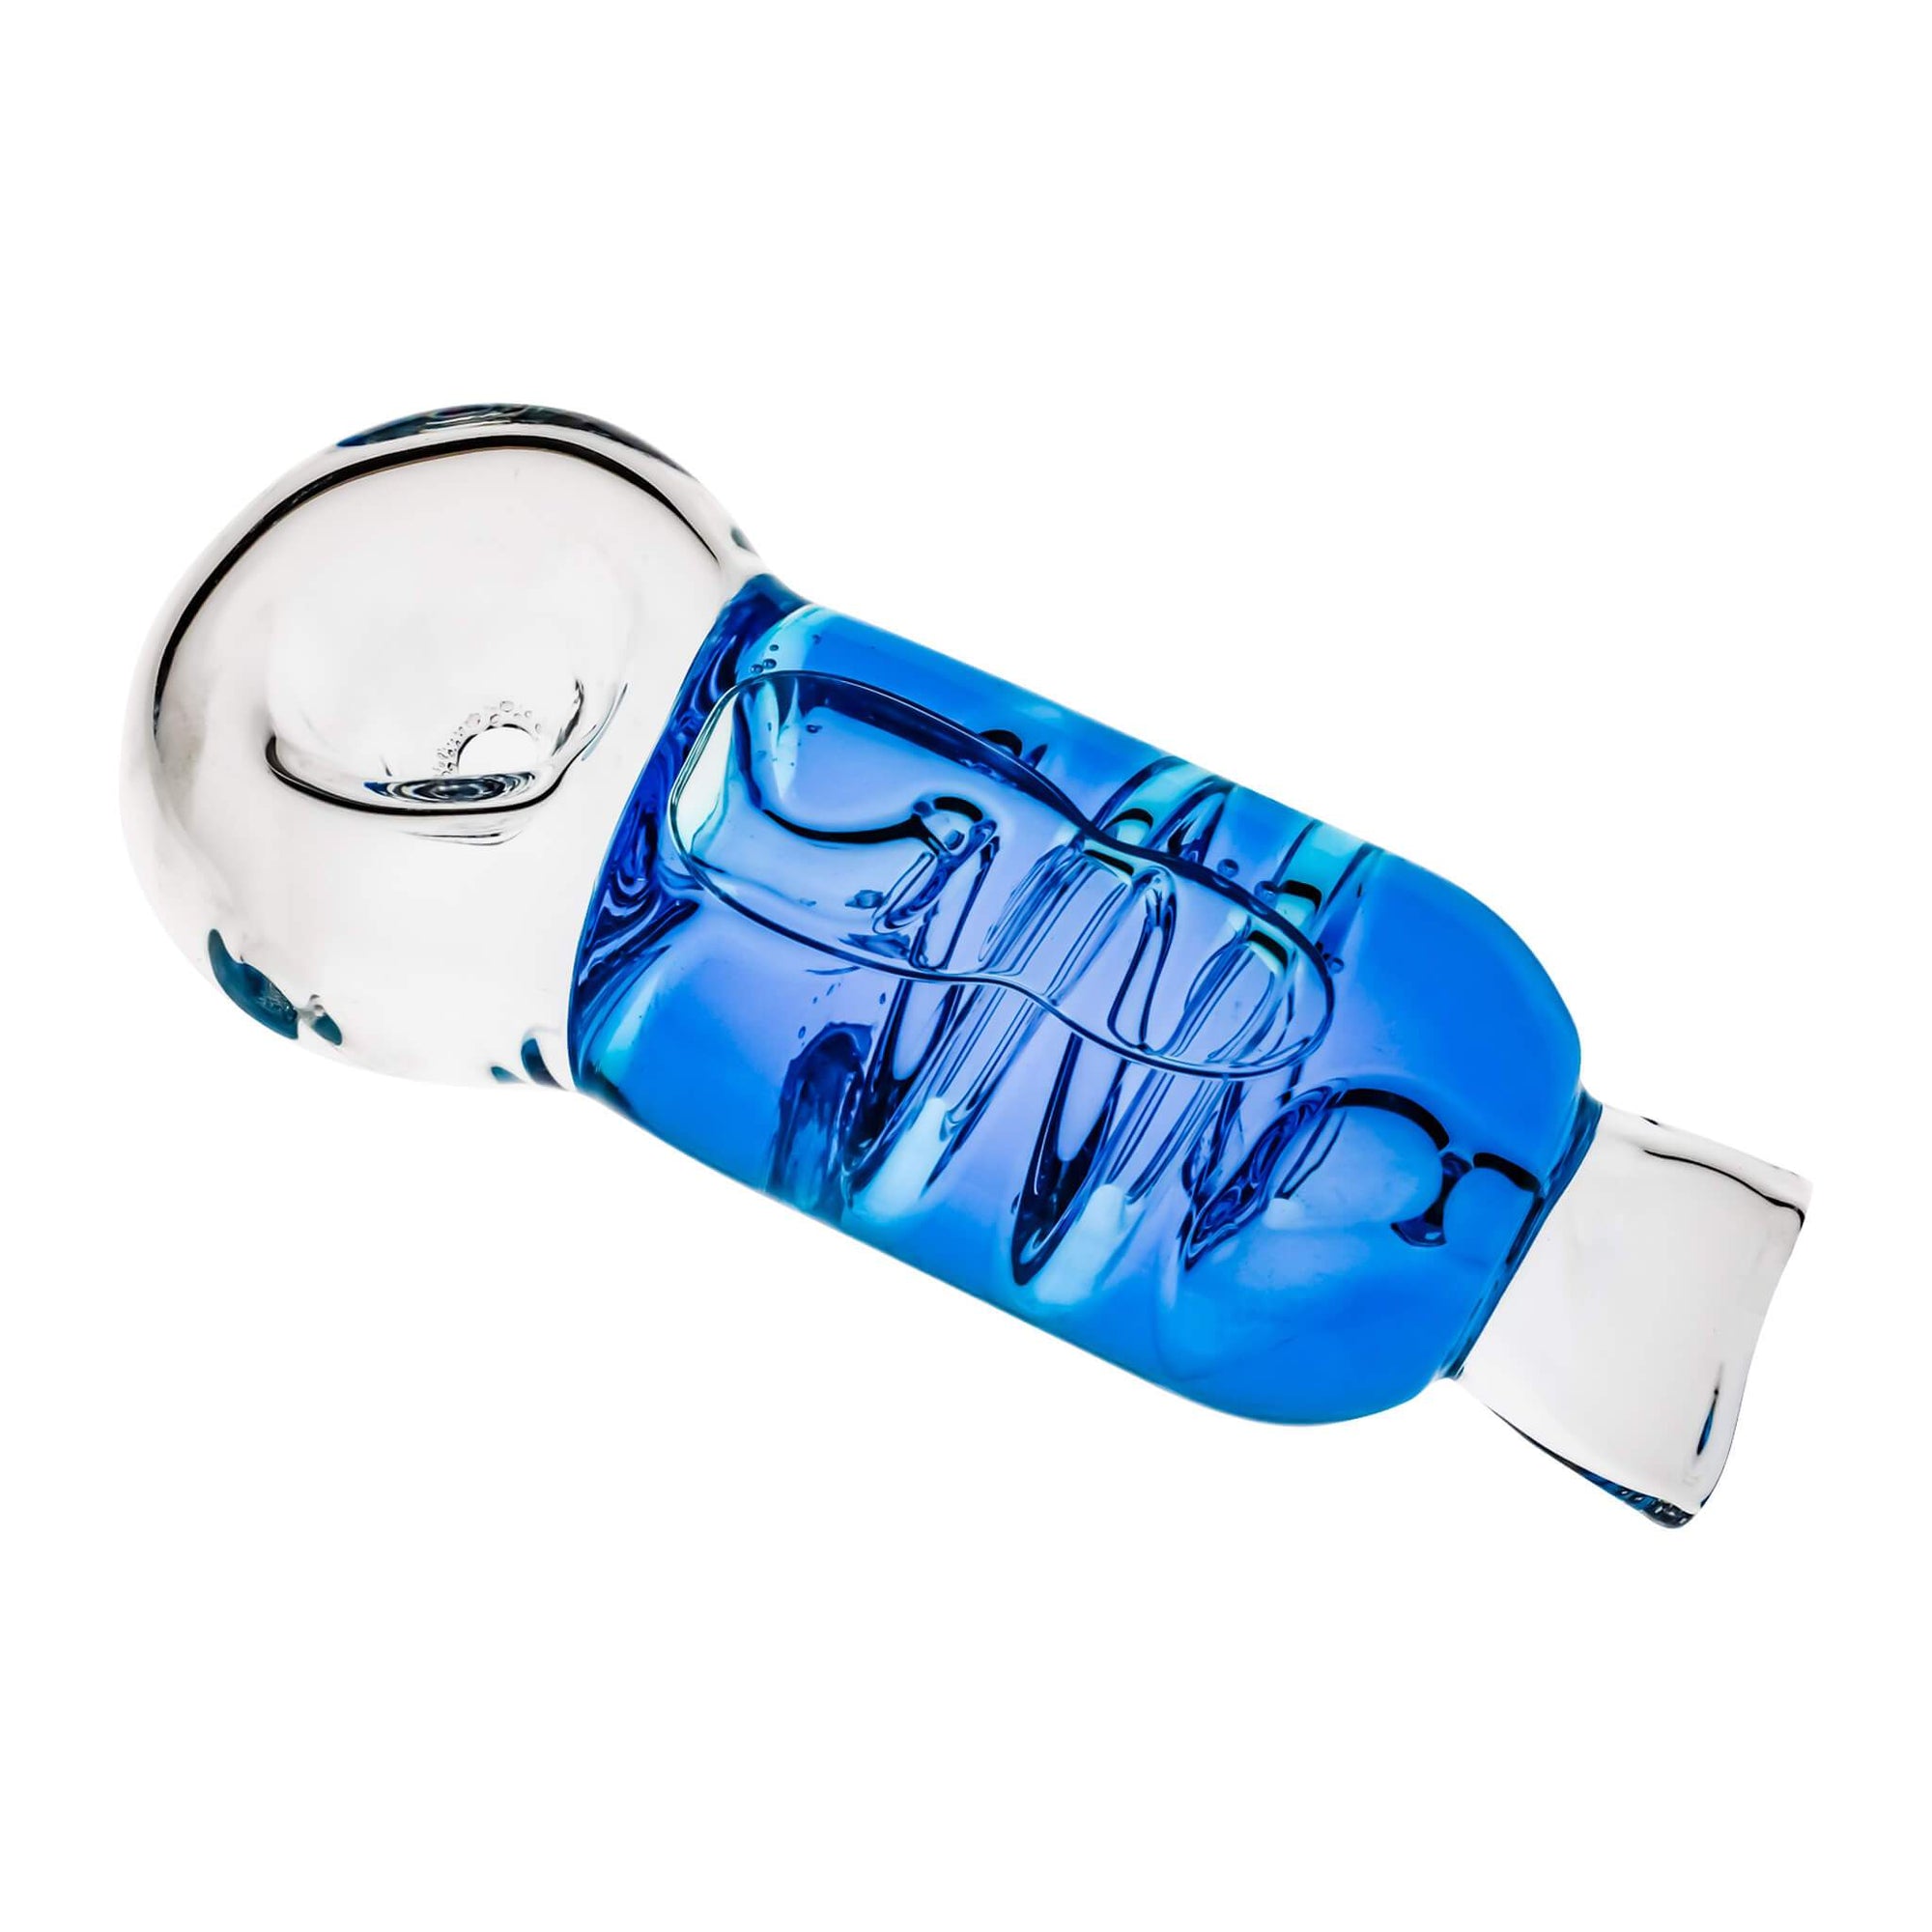 Glycerin Coil Flower Pipe | Blue Top Down View | the dabbing specialists